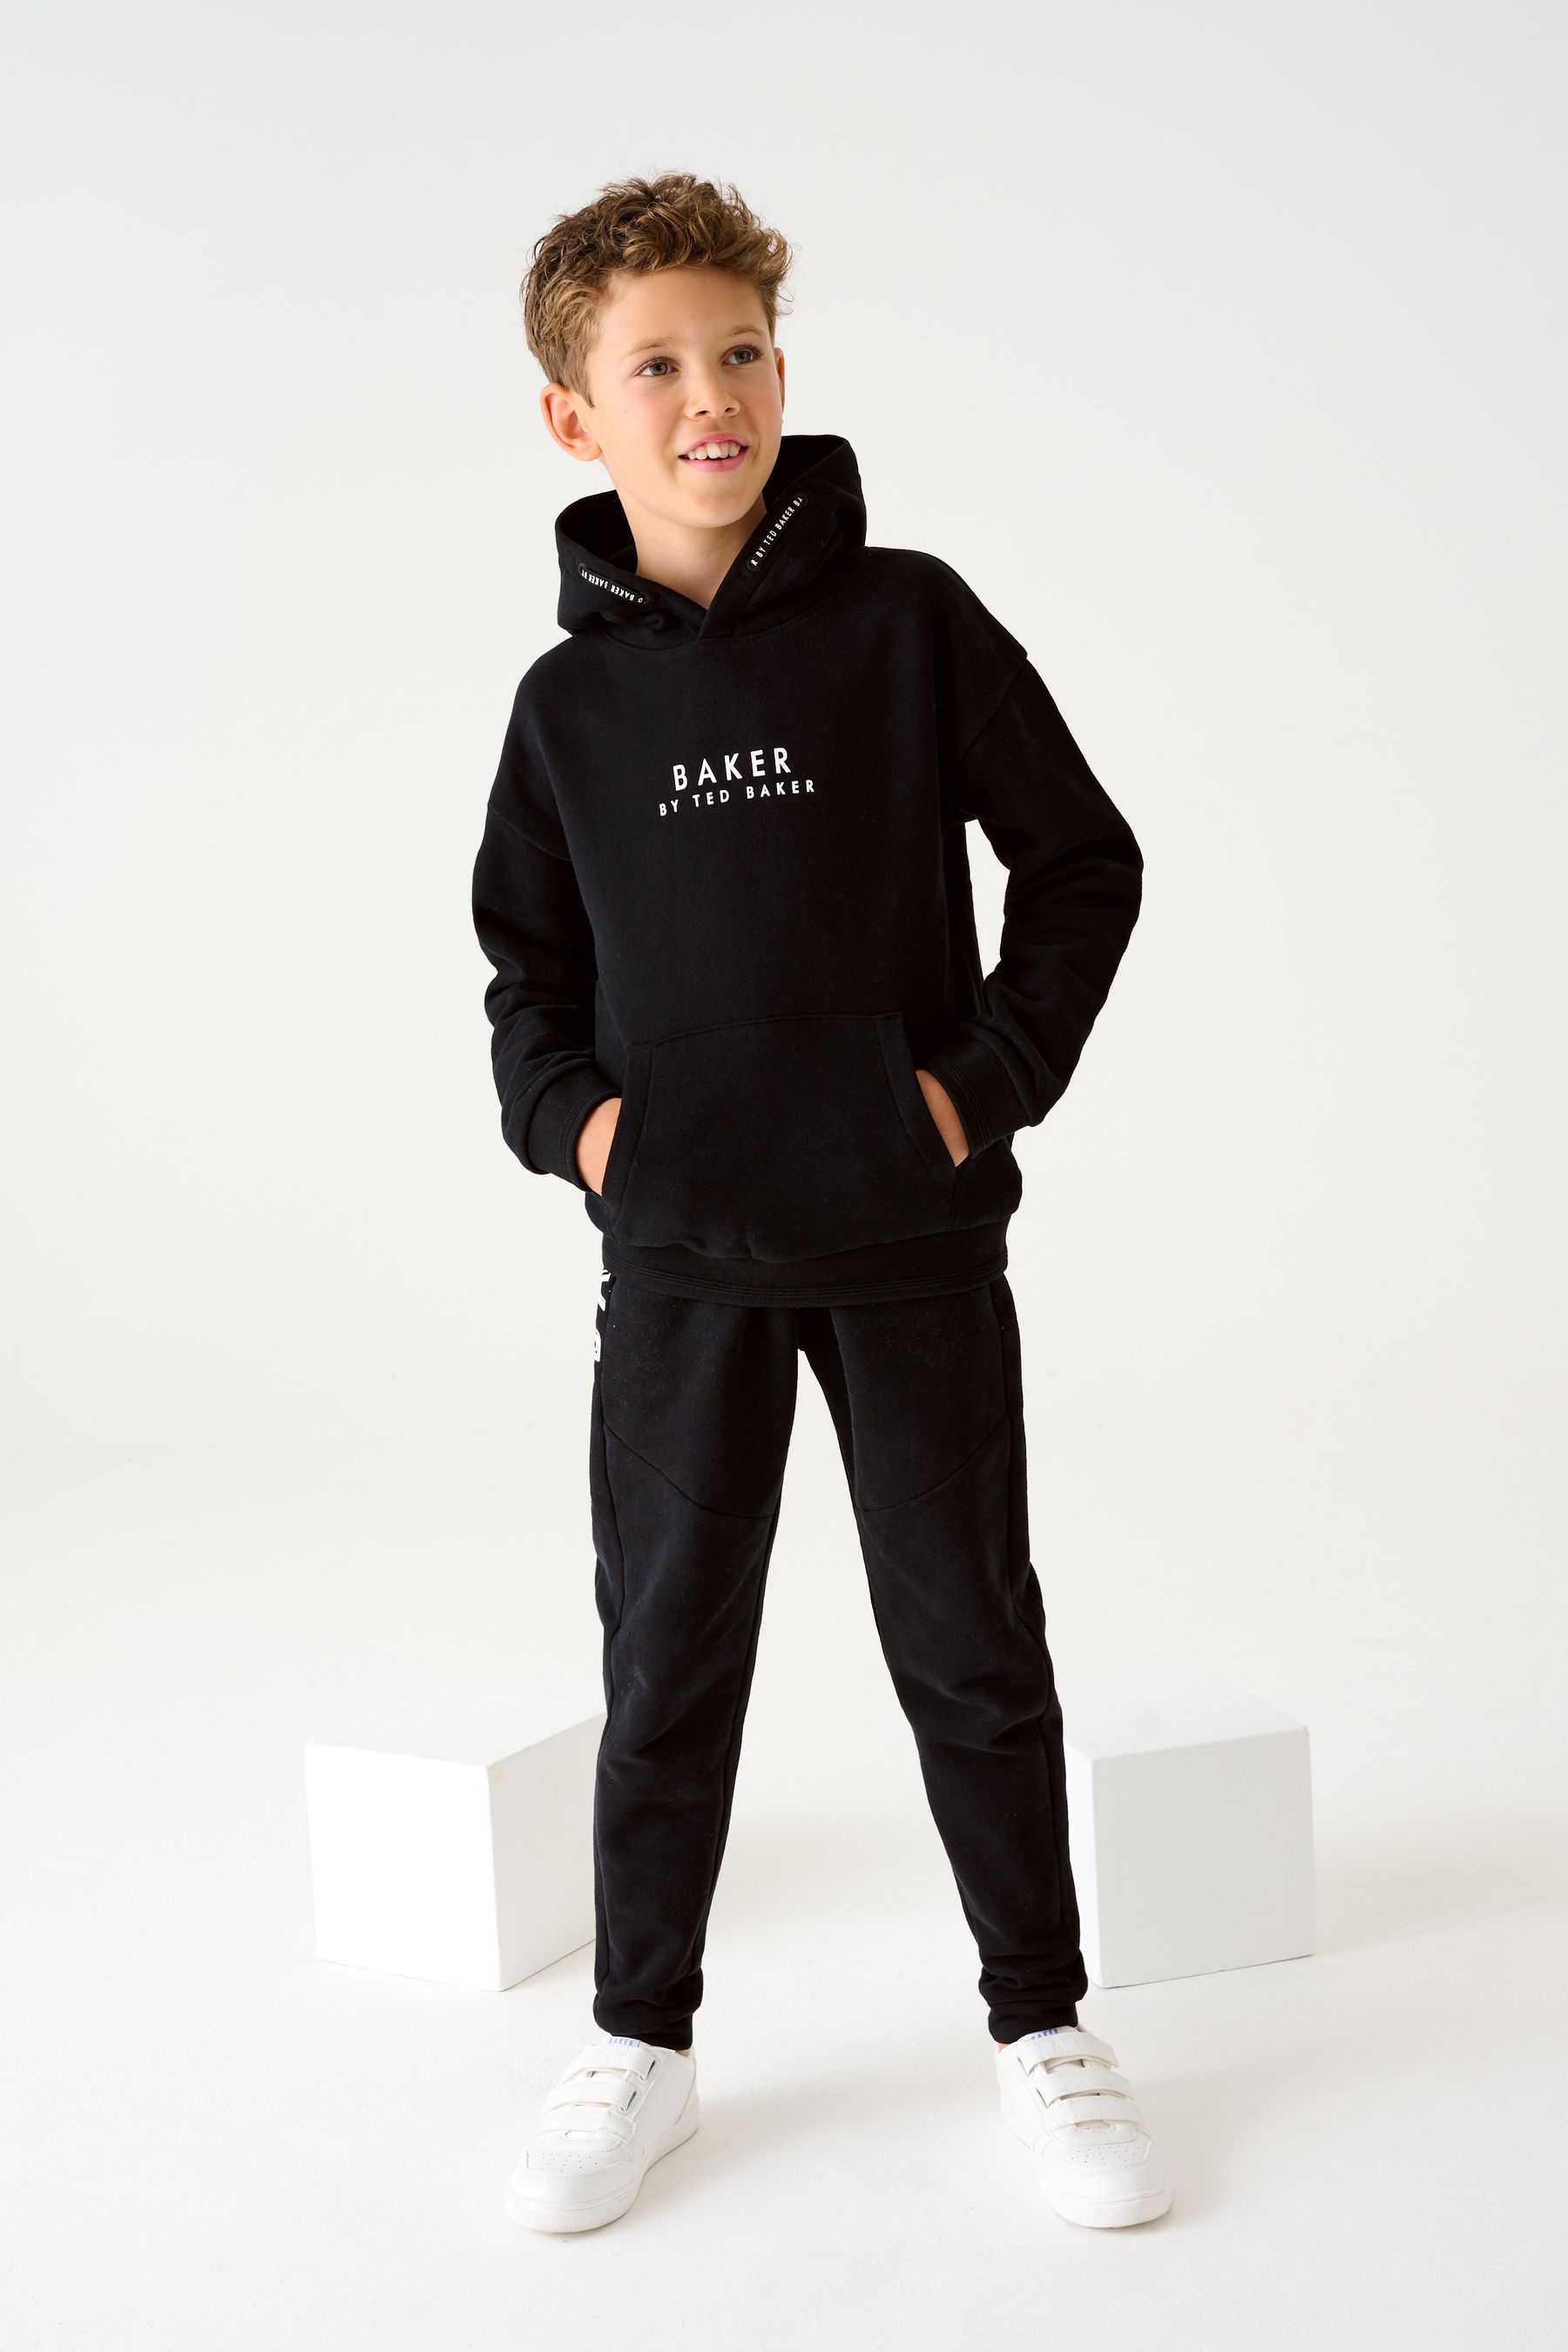 Buy Baker by Ted Baker Overhead Hoodie from the Next UK online shop